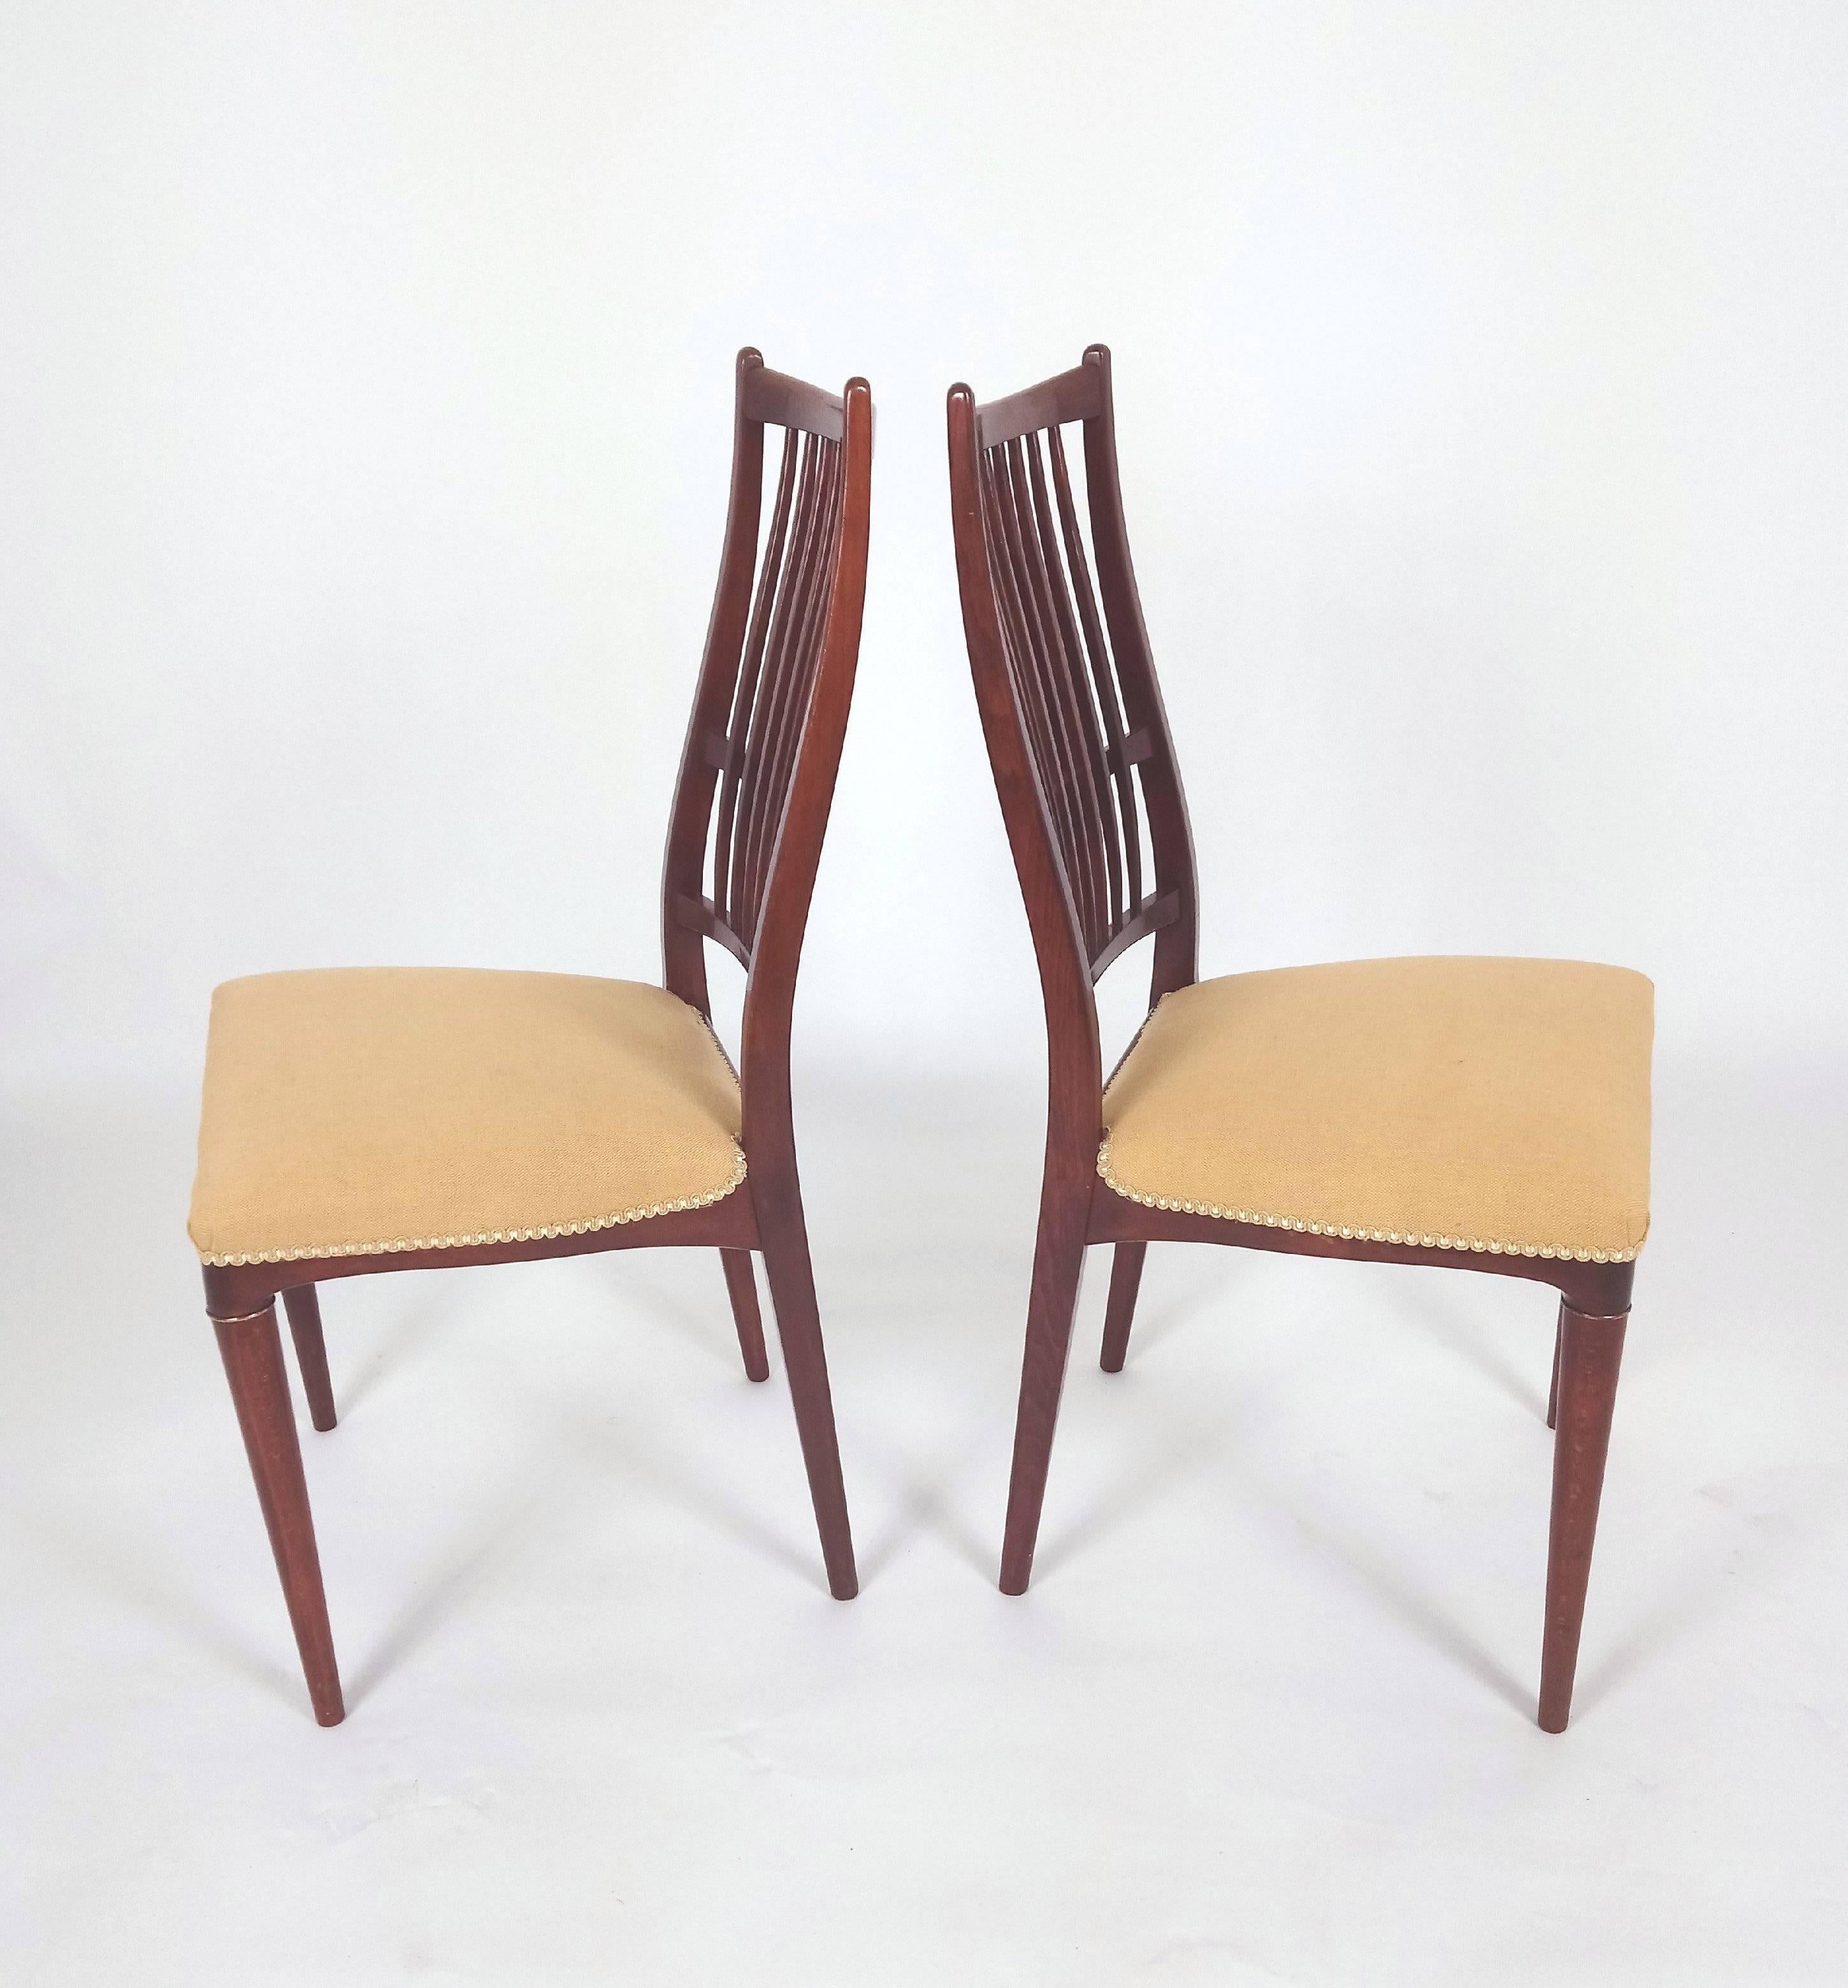 Pair of Mid-20th Century Swedish Beech Side Chairs In Excellent Condition In London, west Sussex